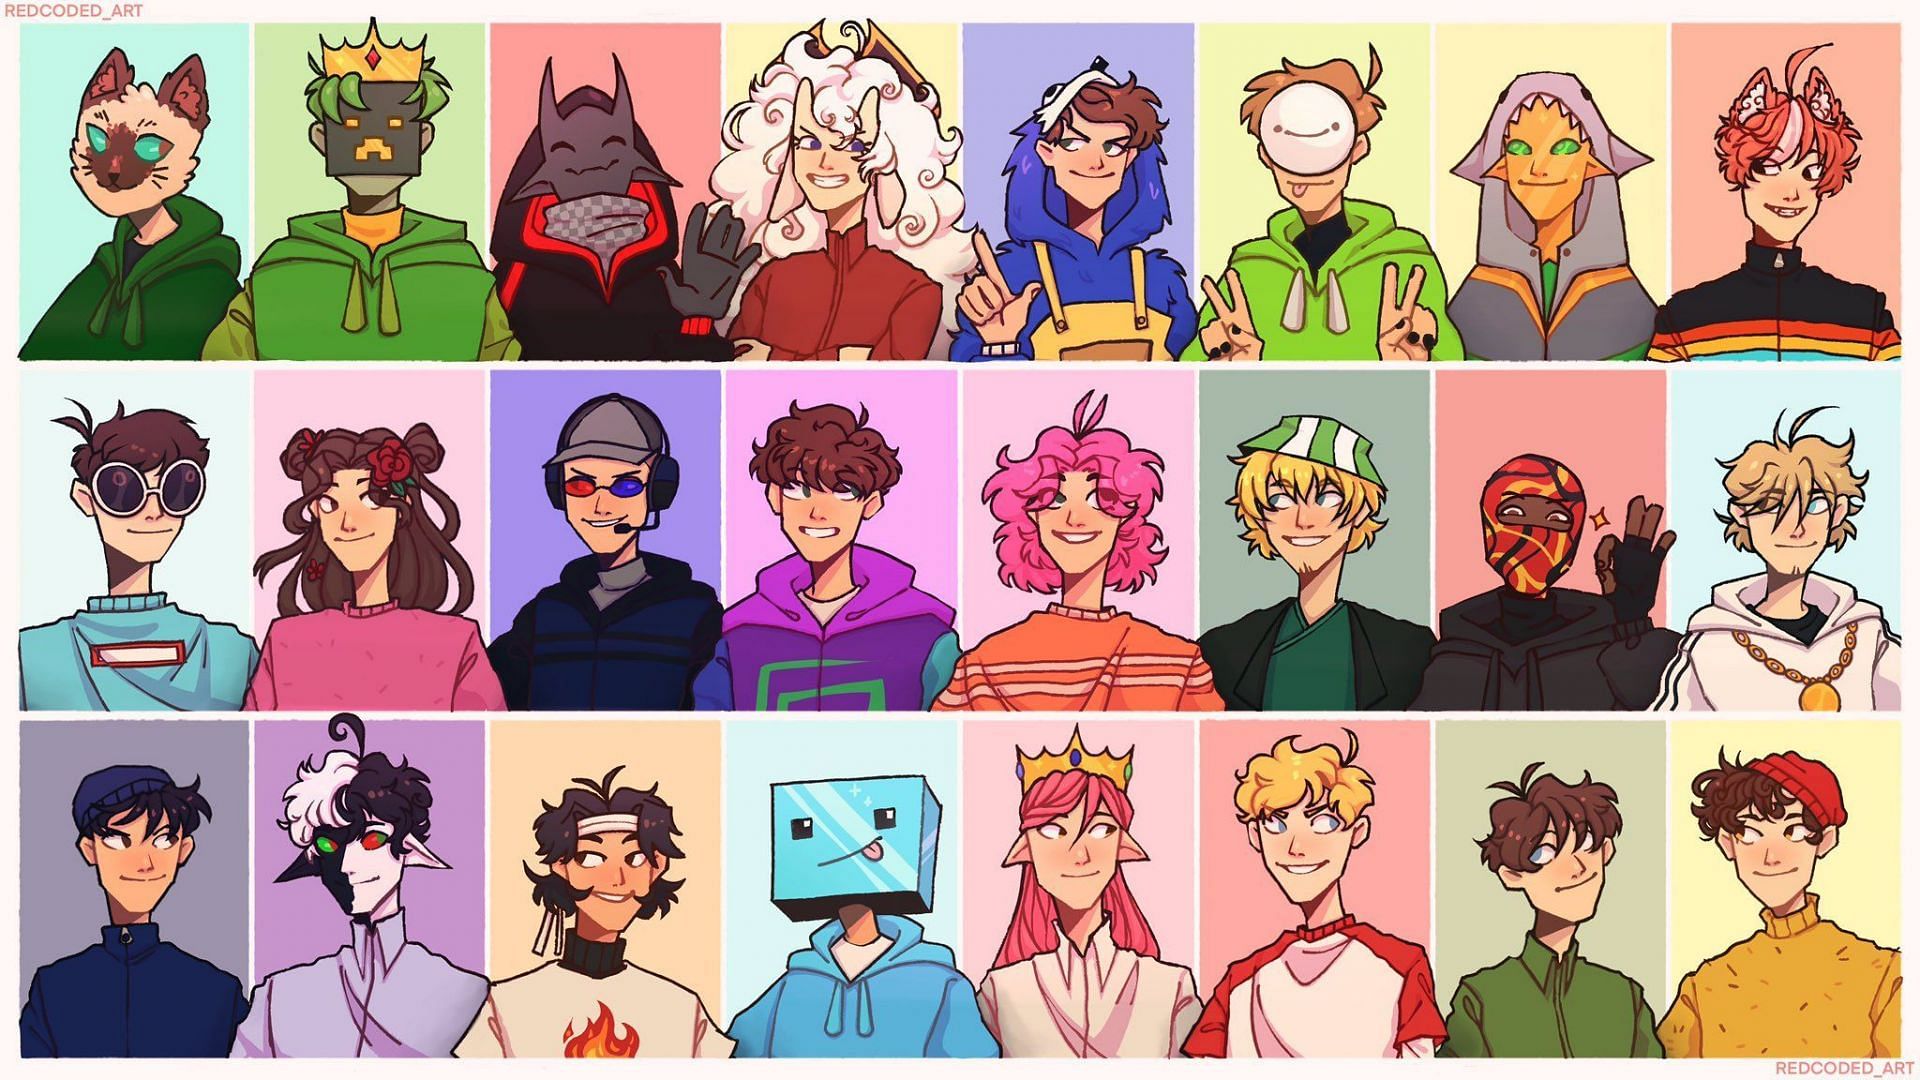 Character art of much of the Dream SMP (Image via Redcoded_art)